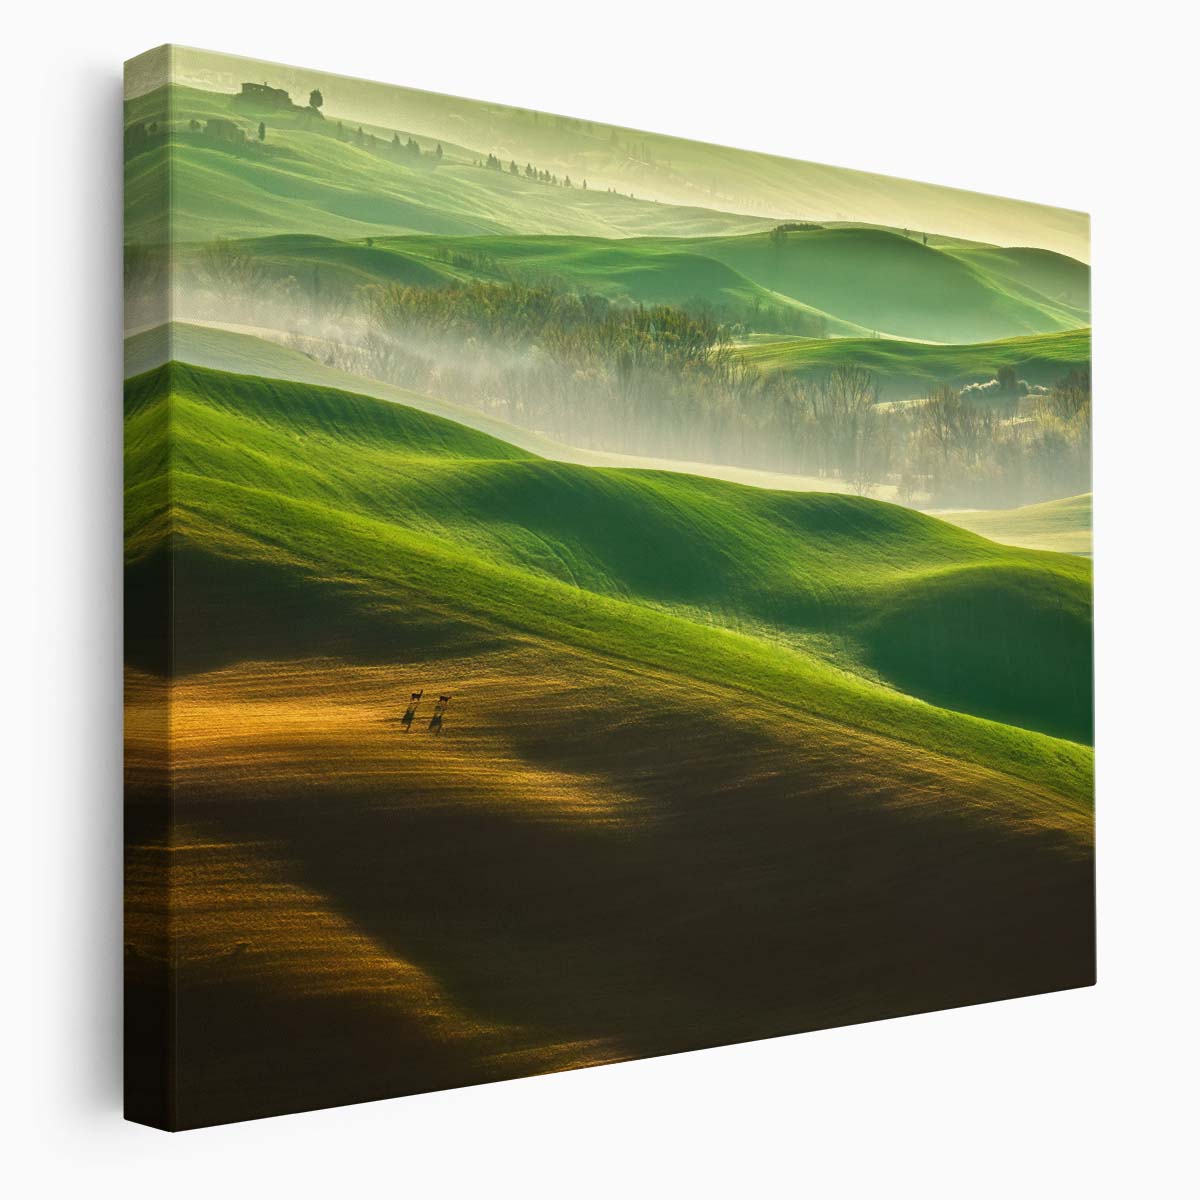 Tuscan Sunrise Misty Fields & Cypress Trees Wall Art by Luxuriance Designs. Made in USA.